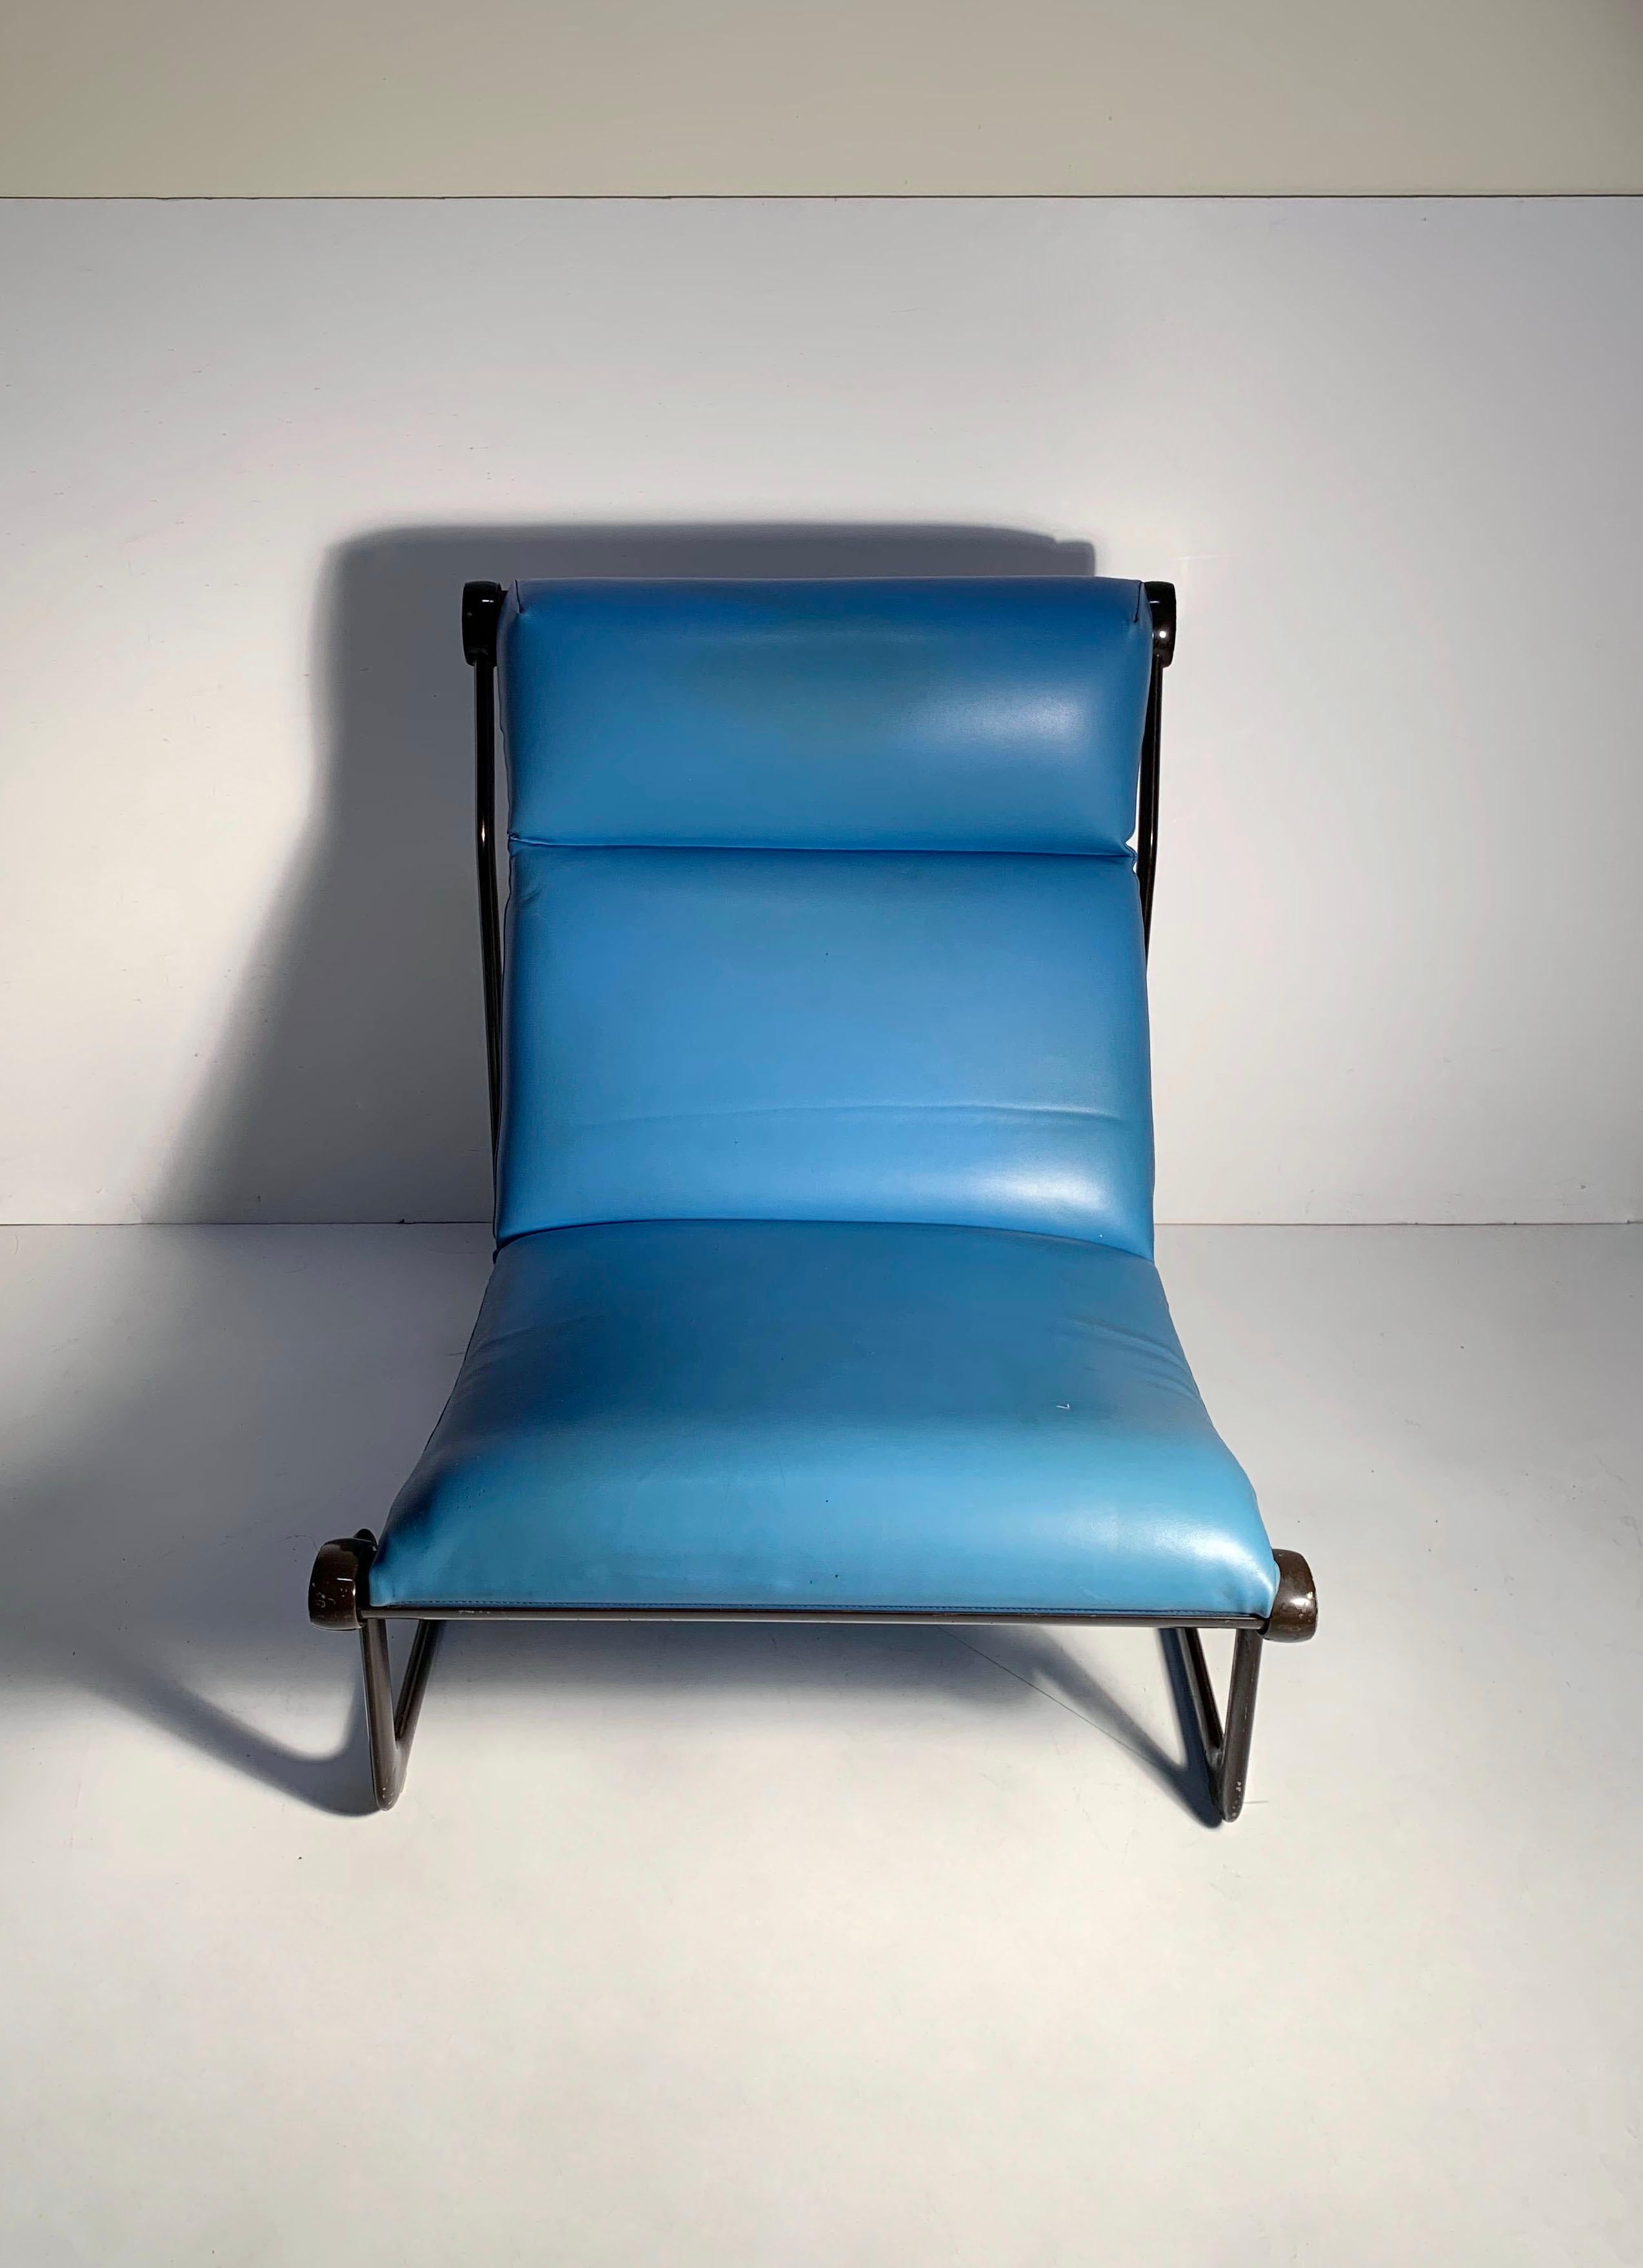 Vintage Lounge Chair by Bruce Hannah and Andrew Morrison for Knoll

A fairly more rare variation of the chair in a high back model. 

Both the frame finish and the upholstery is original and shows a fair amount of wear. Will most likely desire to